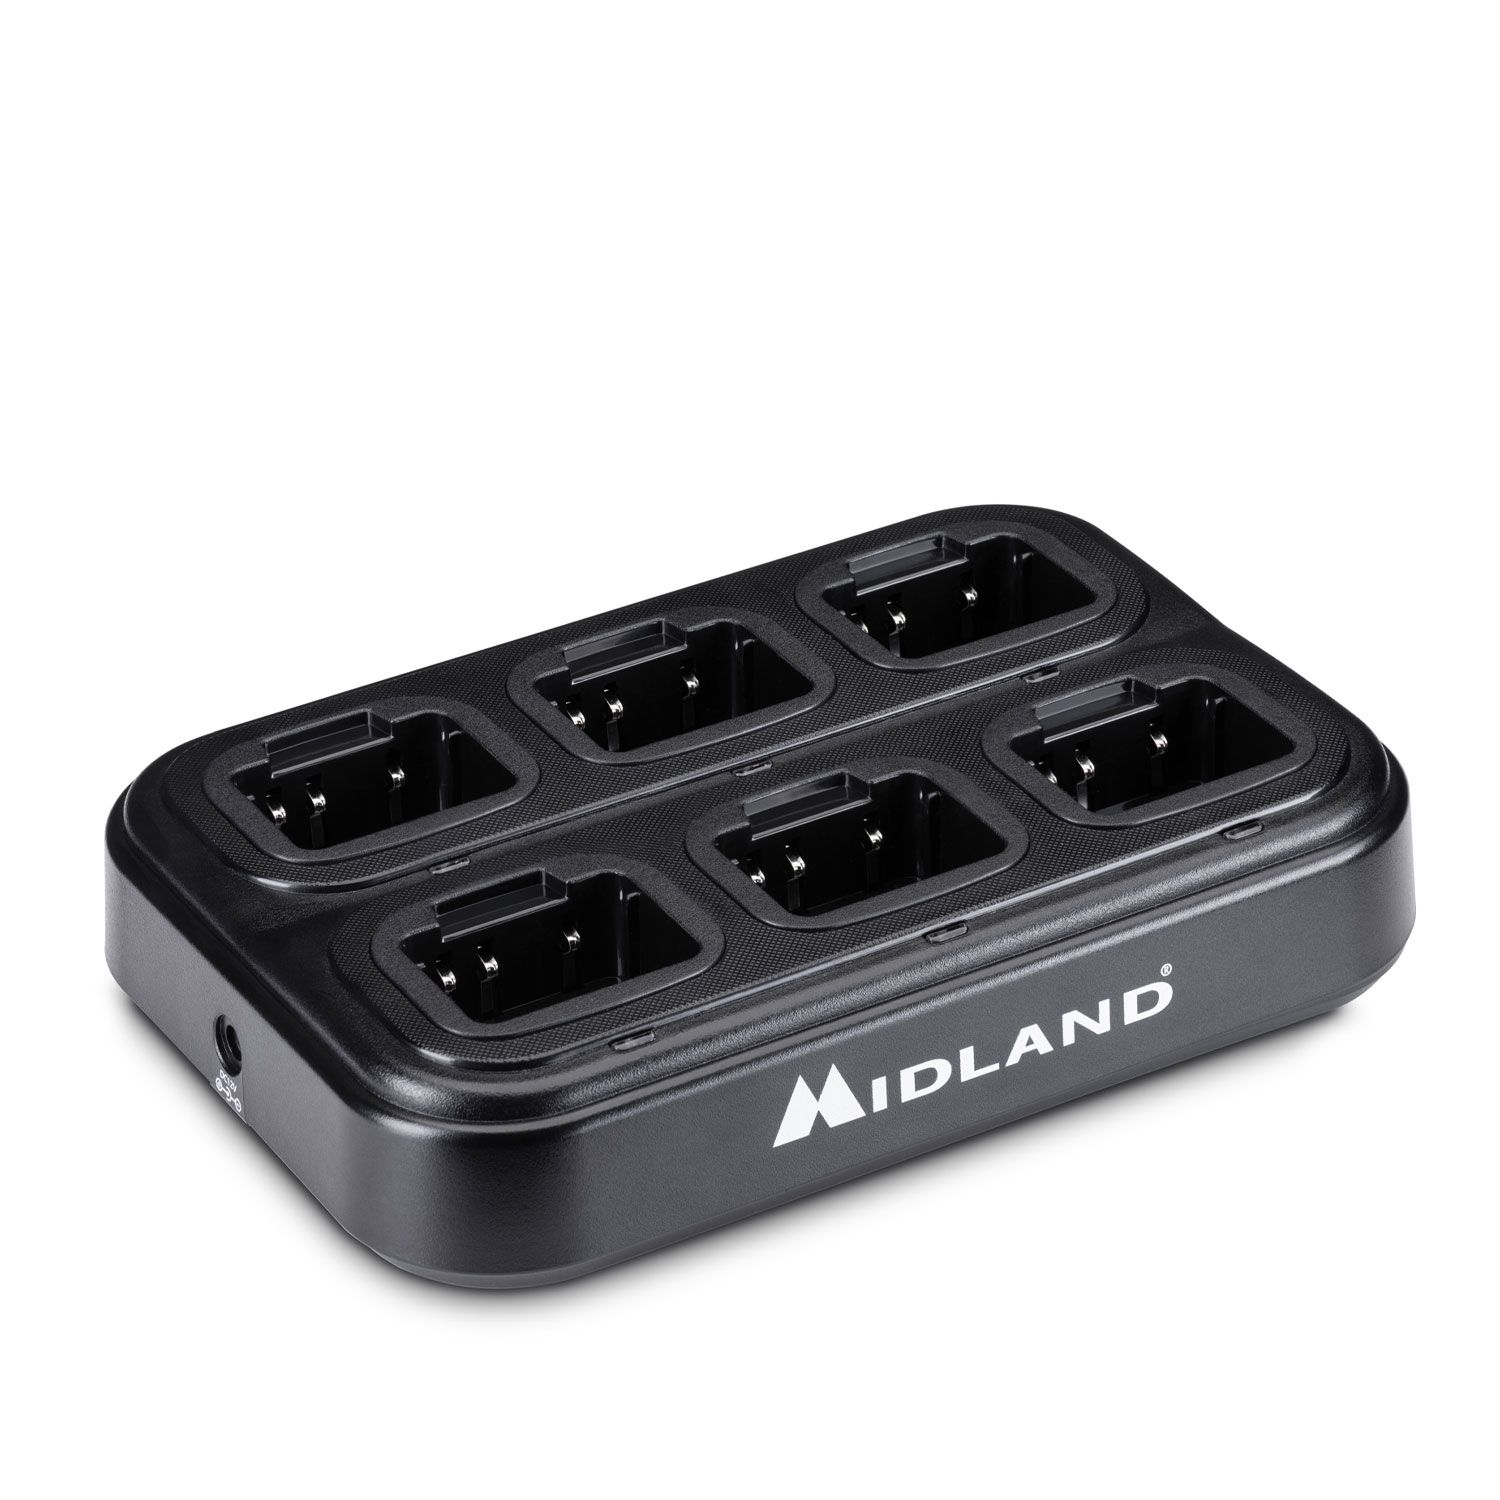 MULTI CA PB-G15 PRO multiple 6 position charger